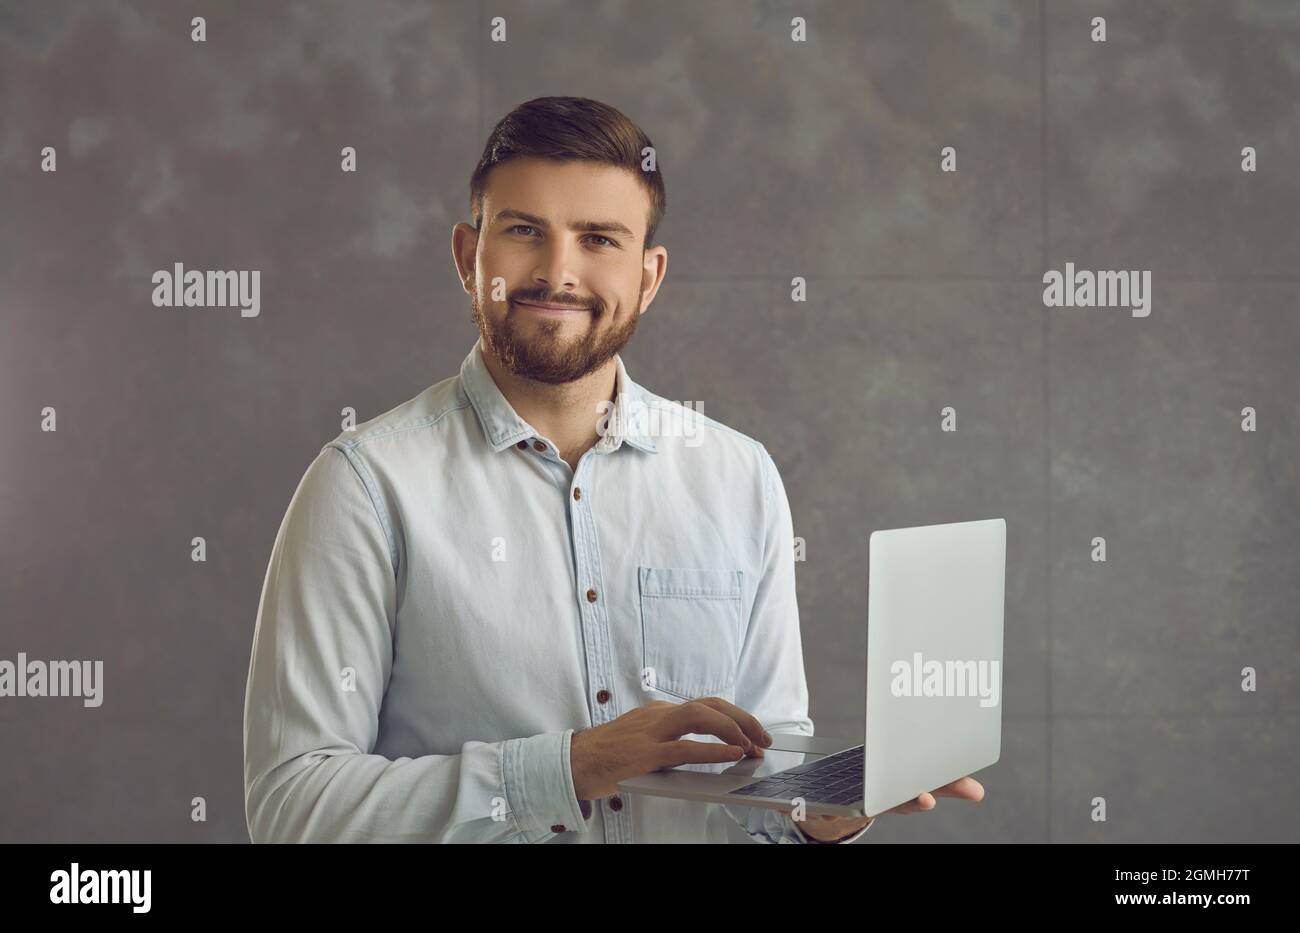 Confident smiling business expert man holding laptop standing on studio wall Stock Photo